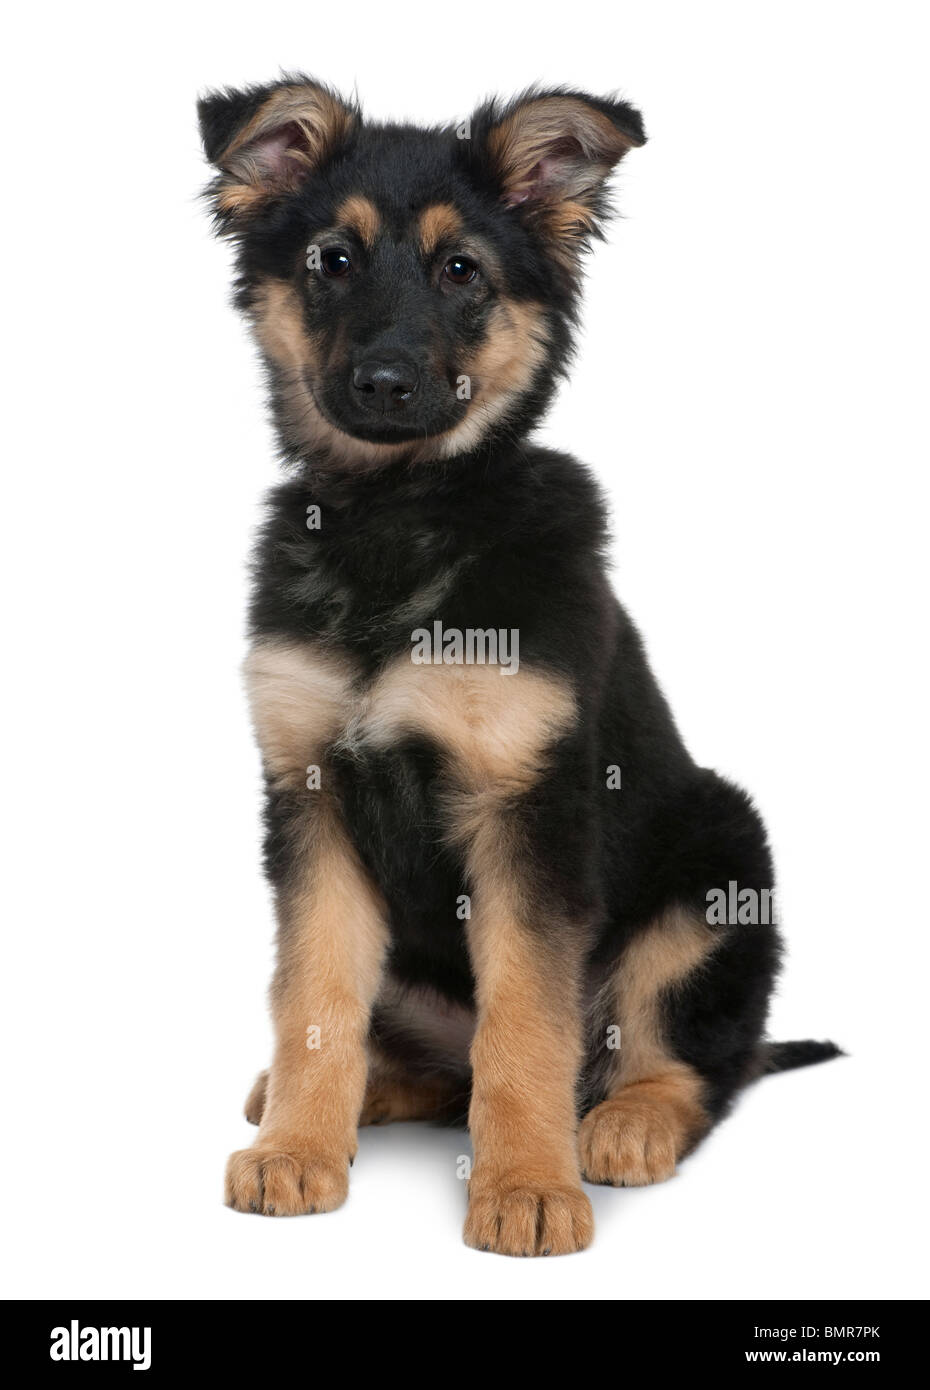 German Shepherd puppy, 3 months old, sitting in front of white background Stock Photo